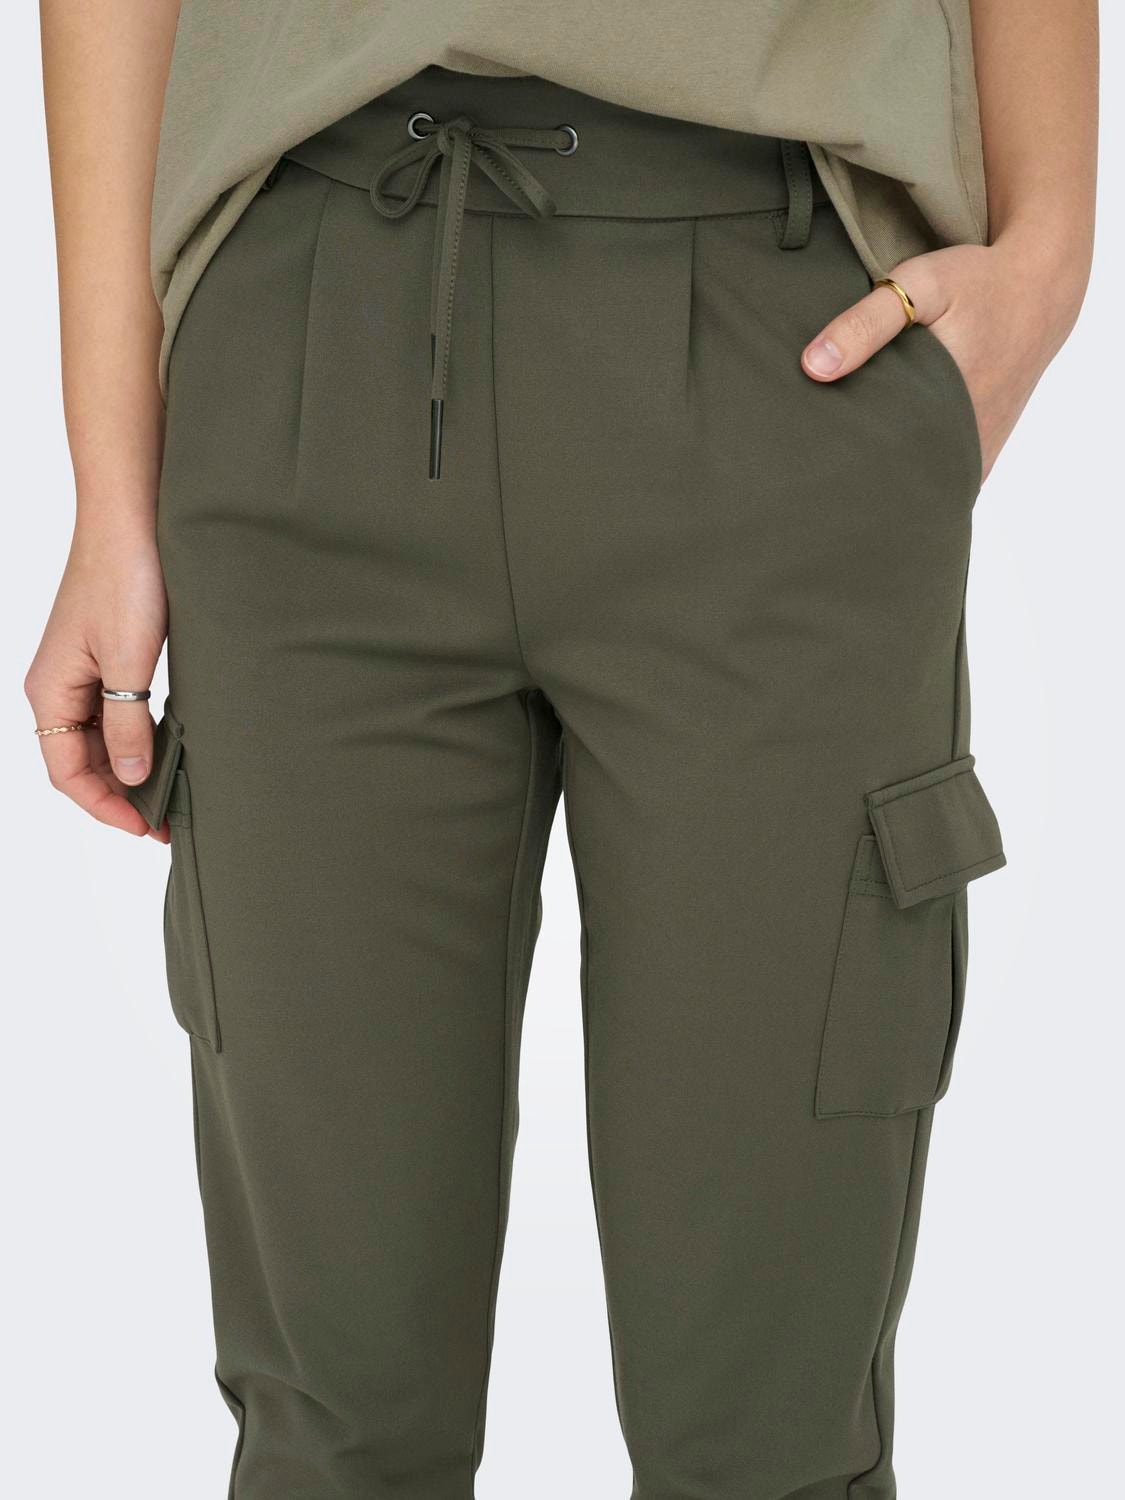 ONLY Poptrash Cargopants -Bungee Cord - 15225893